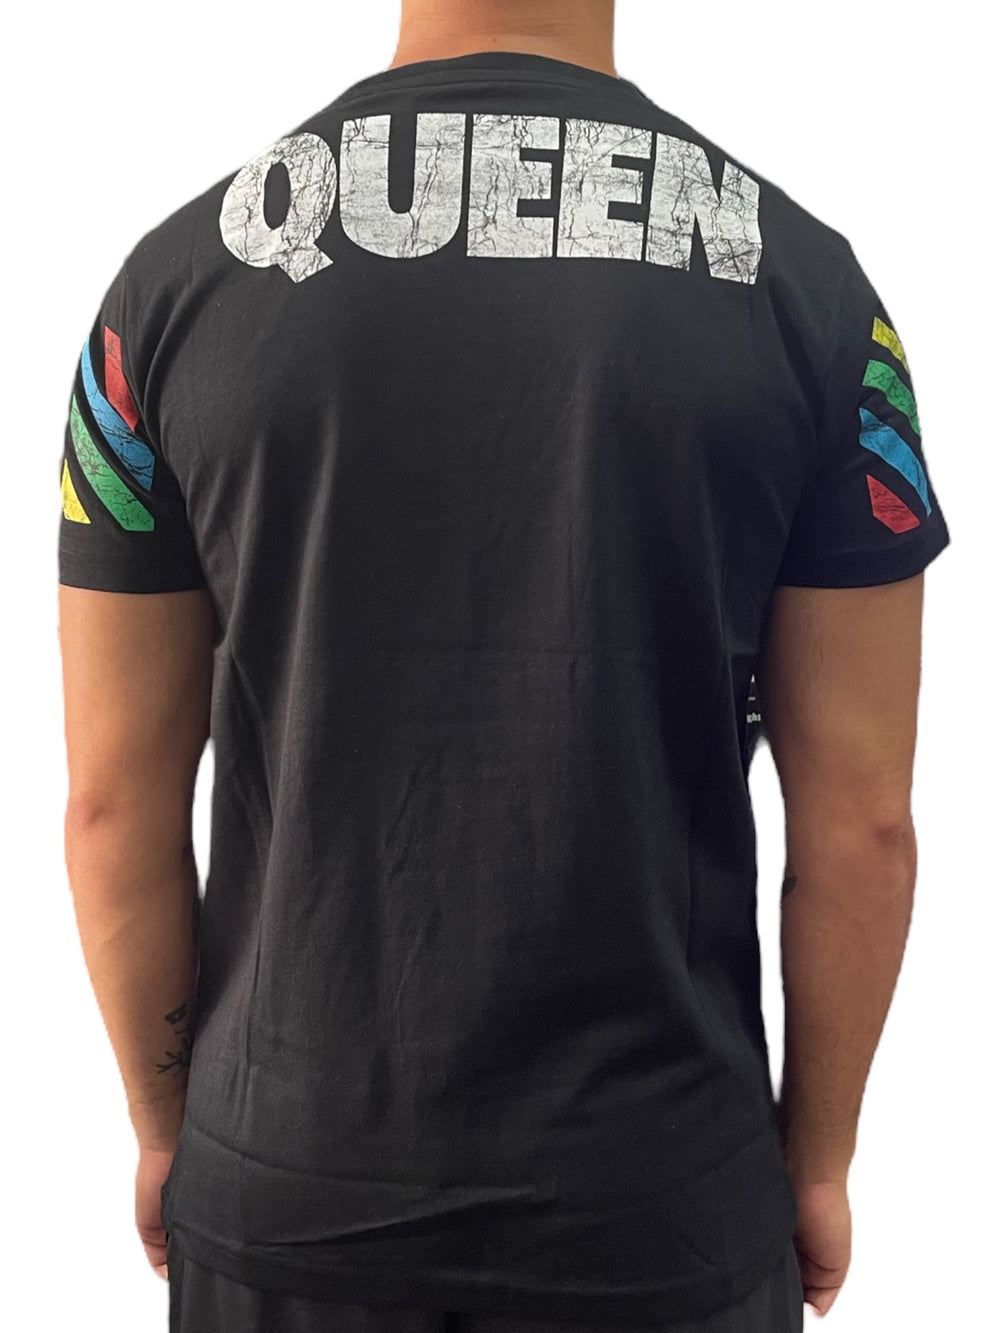 Queen - Hot Space Tour '82 Official T Shirt Various Sizes Freddie Mercury NEW